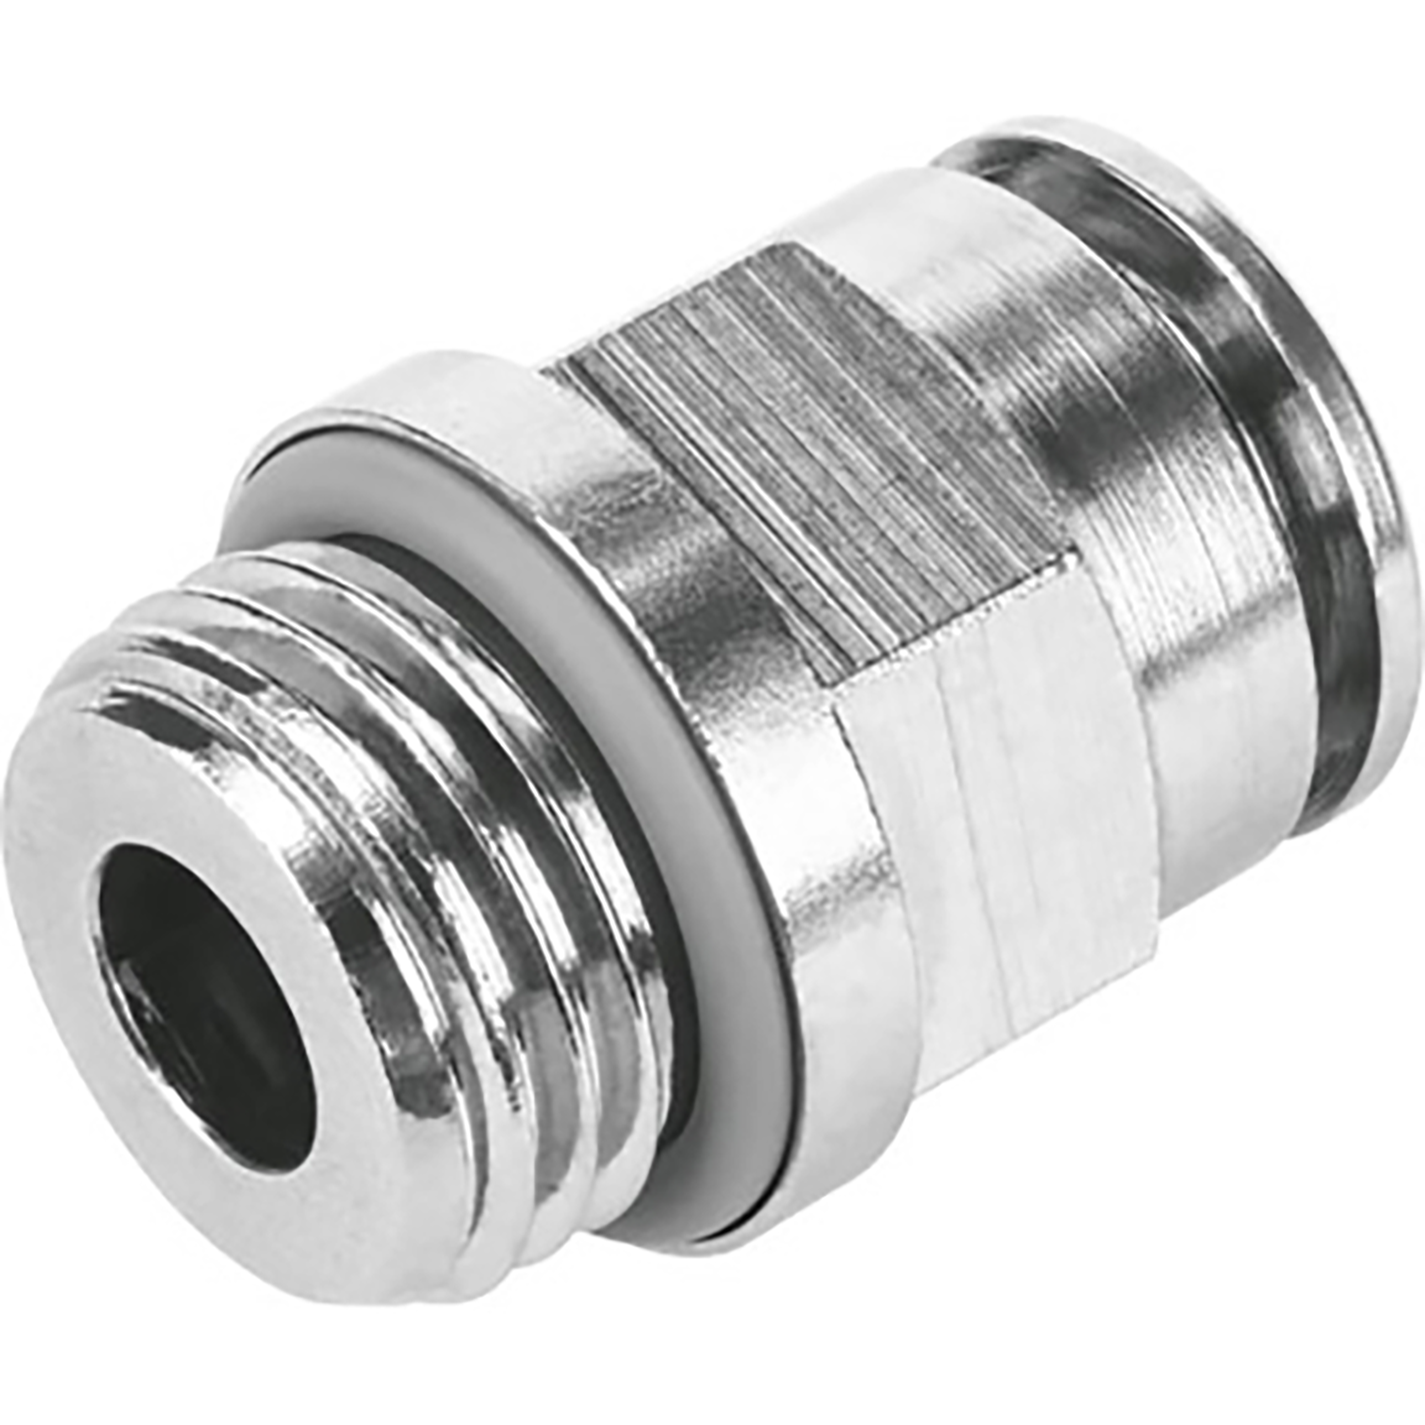 NPQH-D-G14-Q12-P10 PUSH IN FITTINGS sold in multiples of 10 only